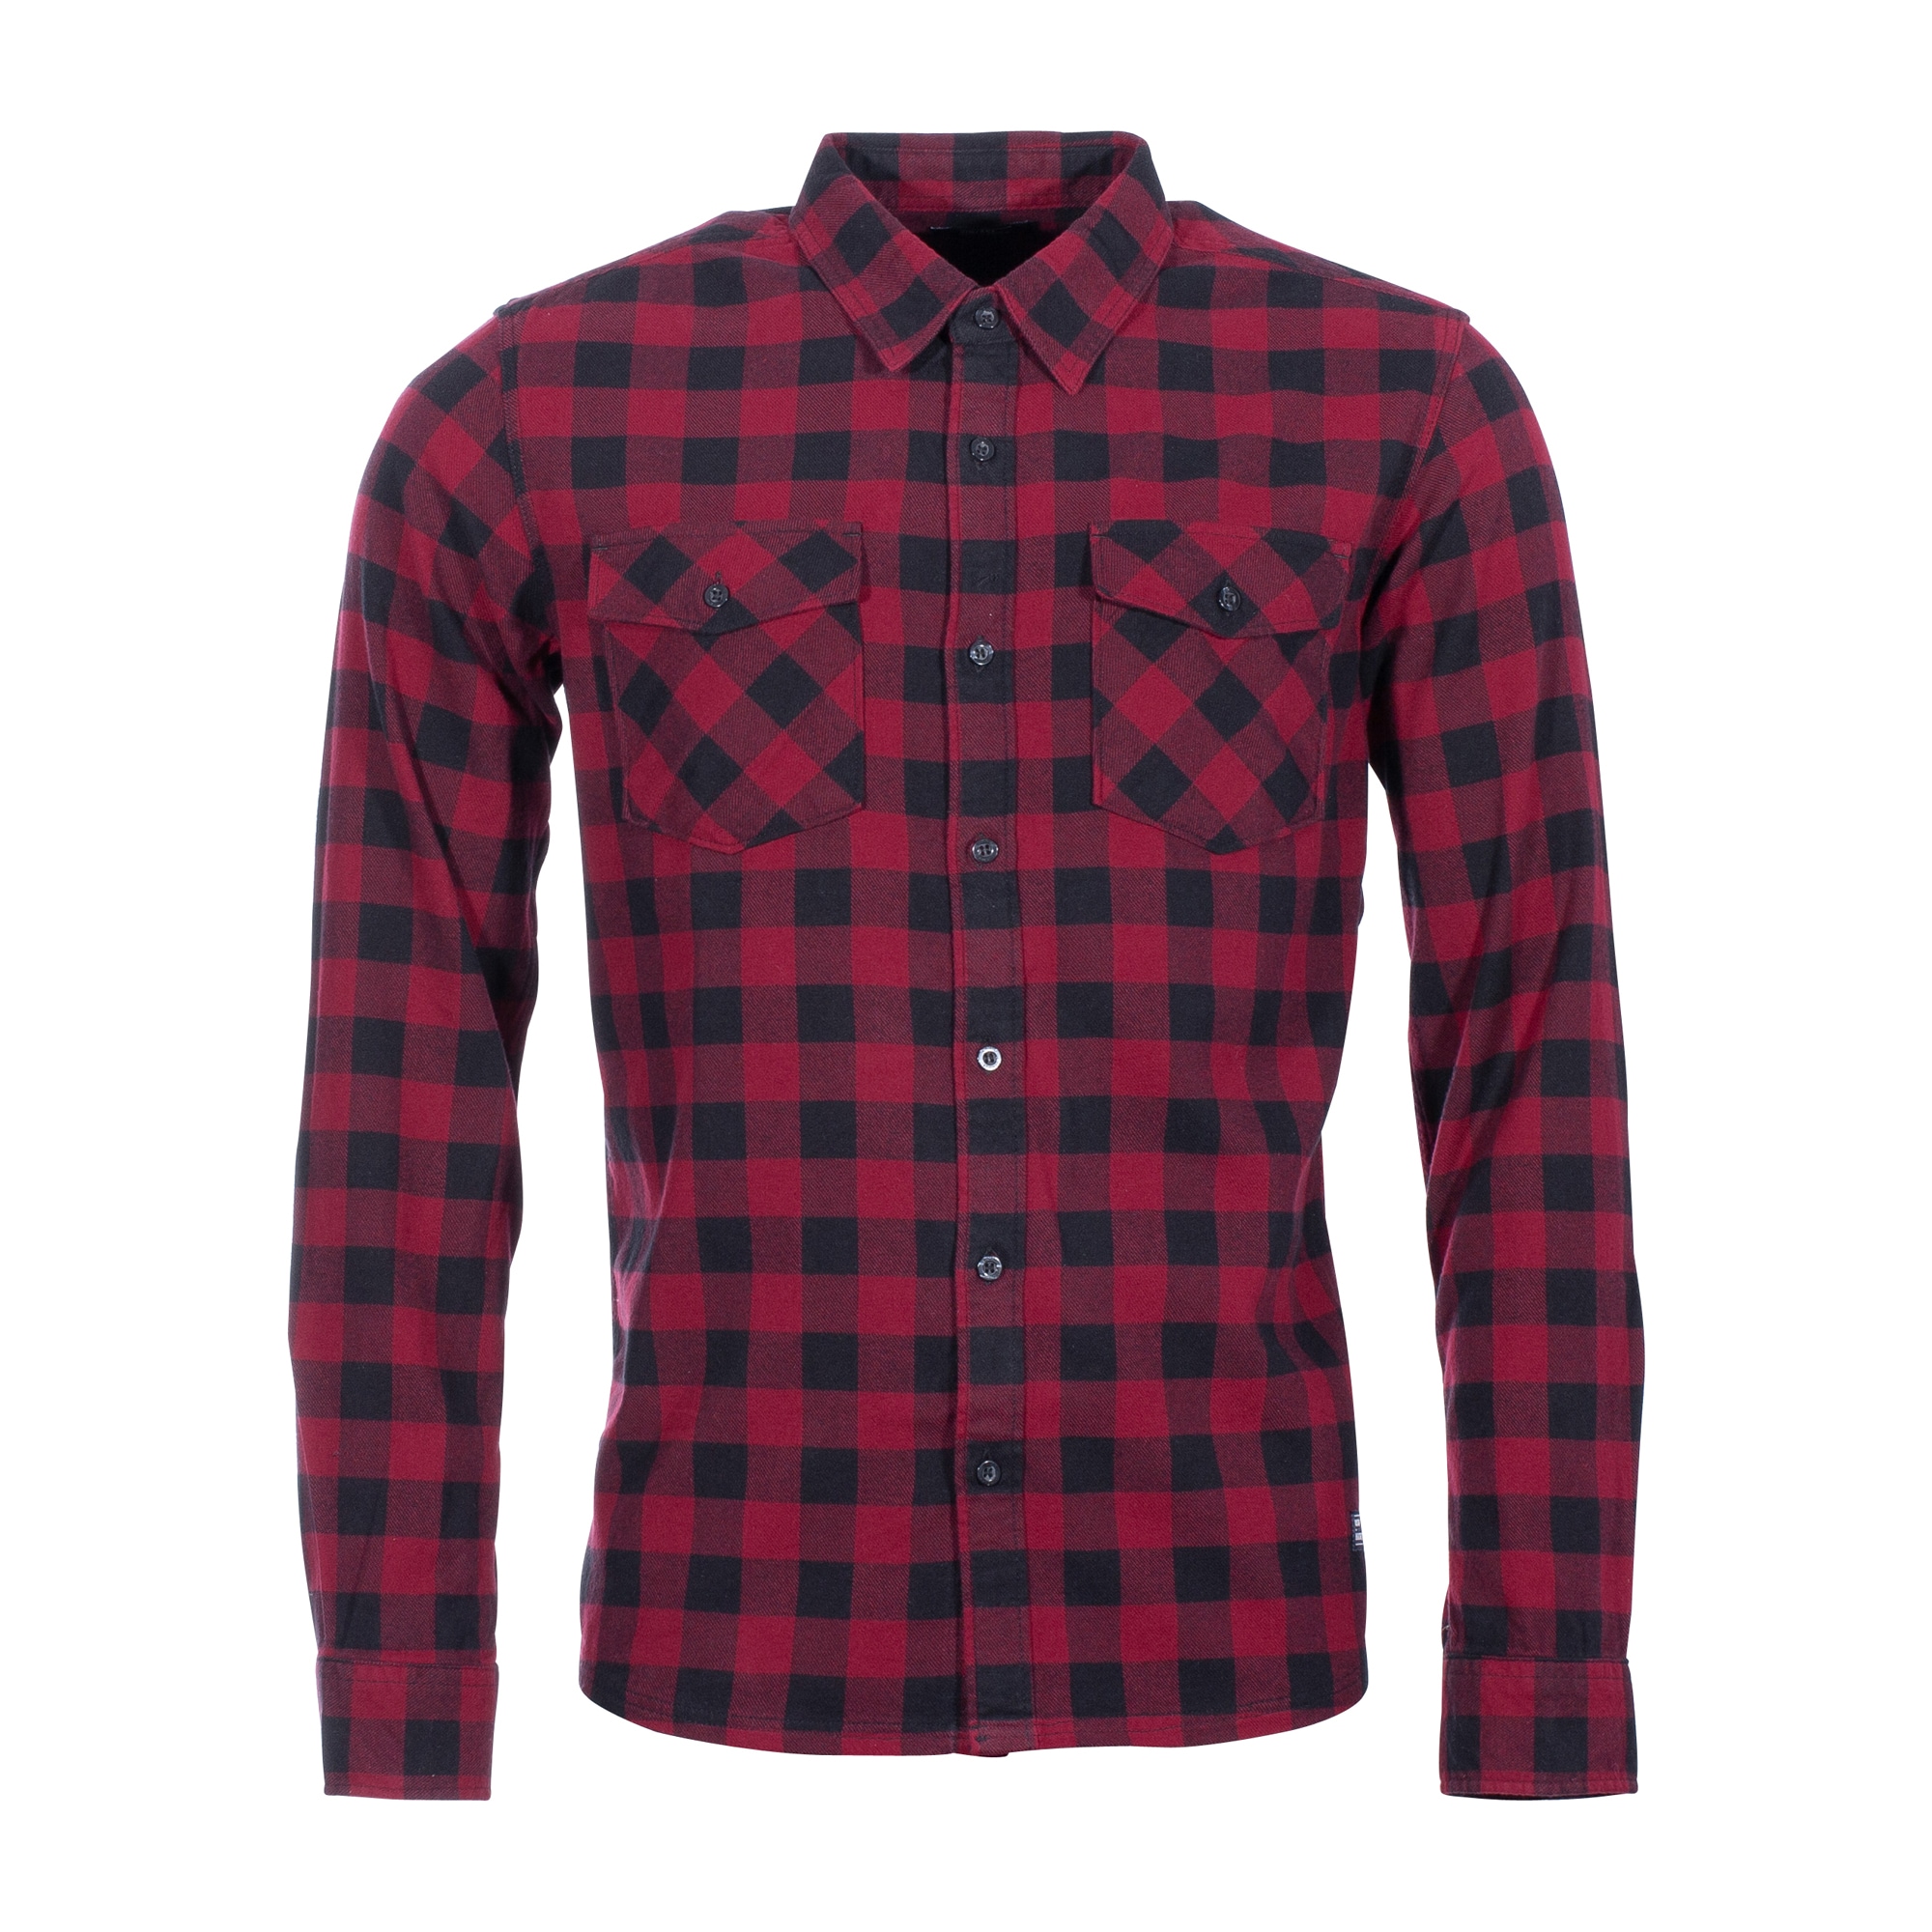 Purchase the Vintage Industries Harley Shirt red check by ASMC